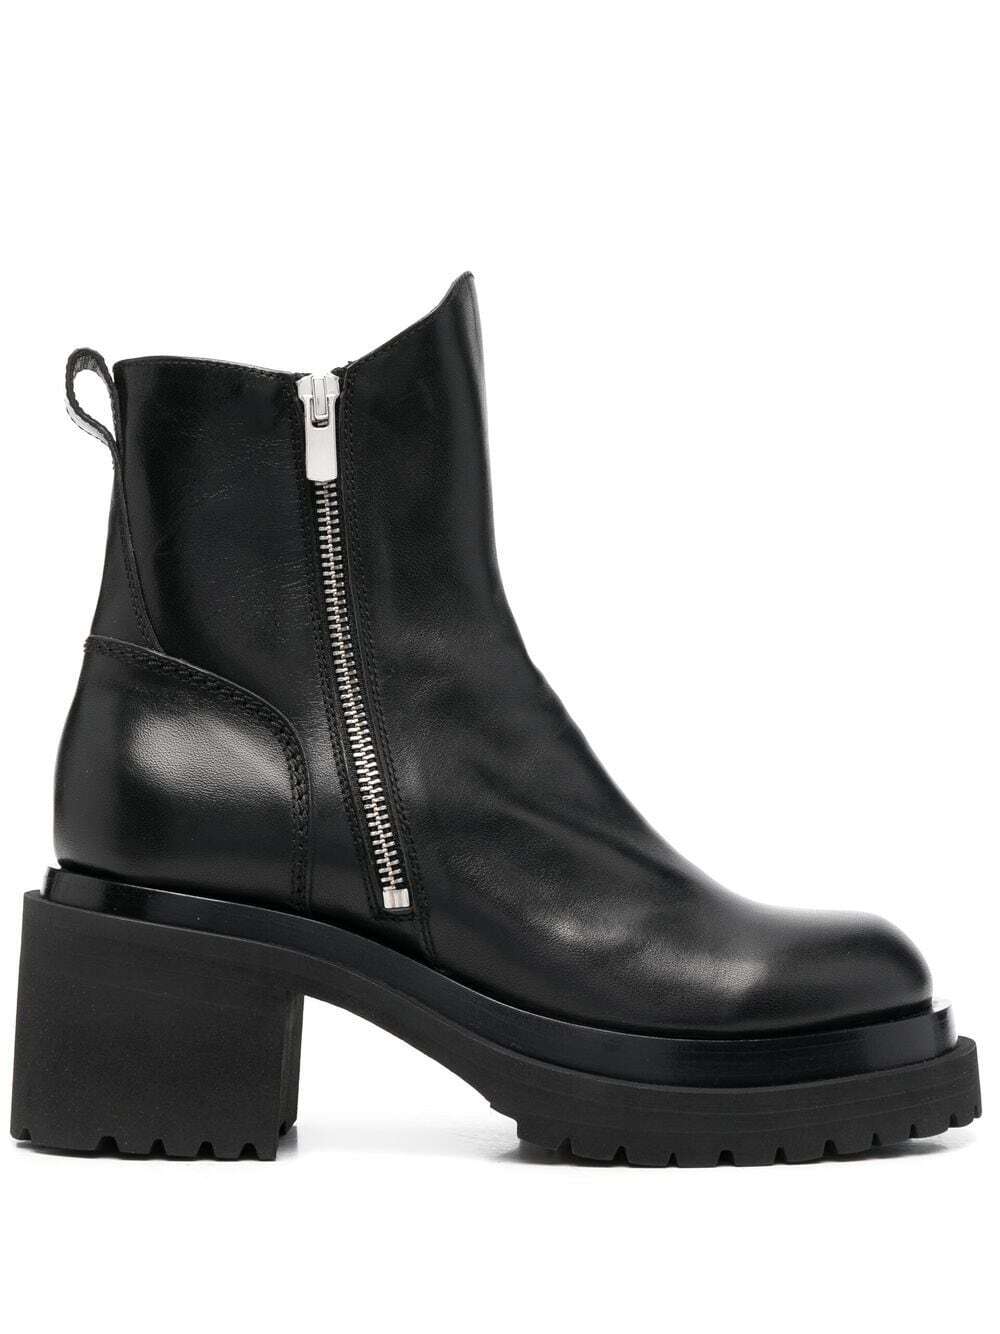 Officine Creative Fiore 002 70mm ankle boots - Black